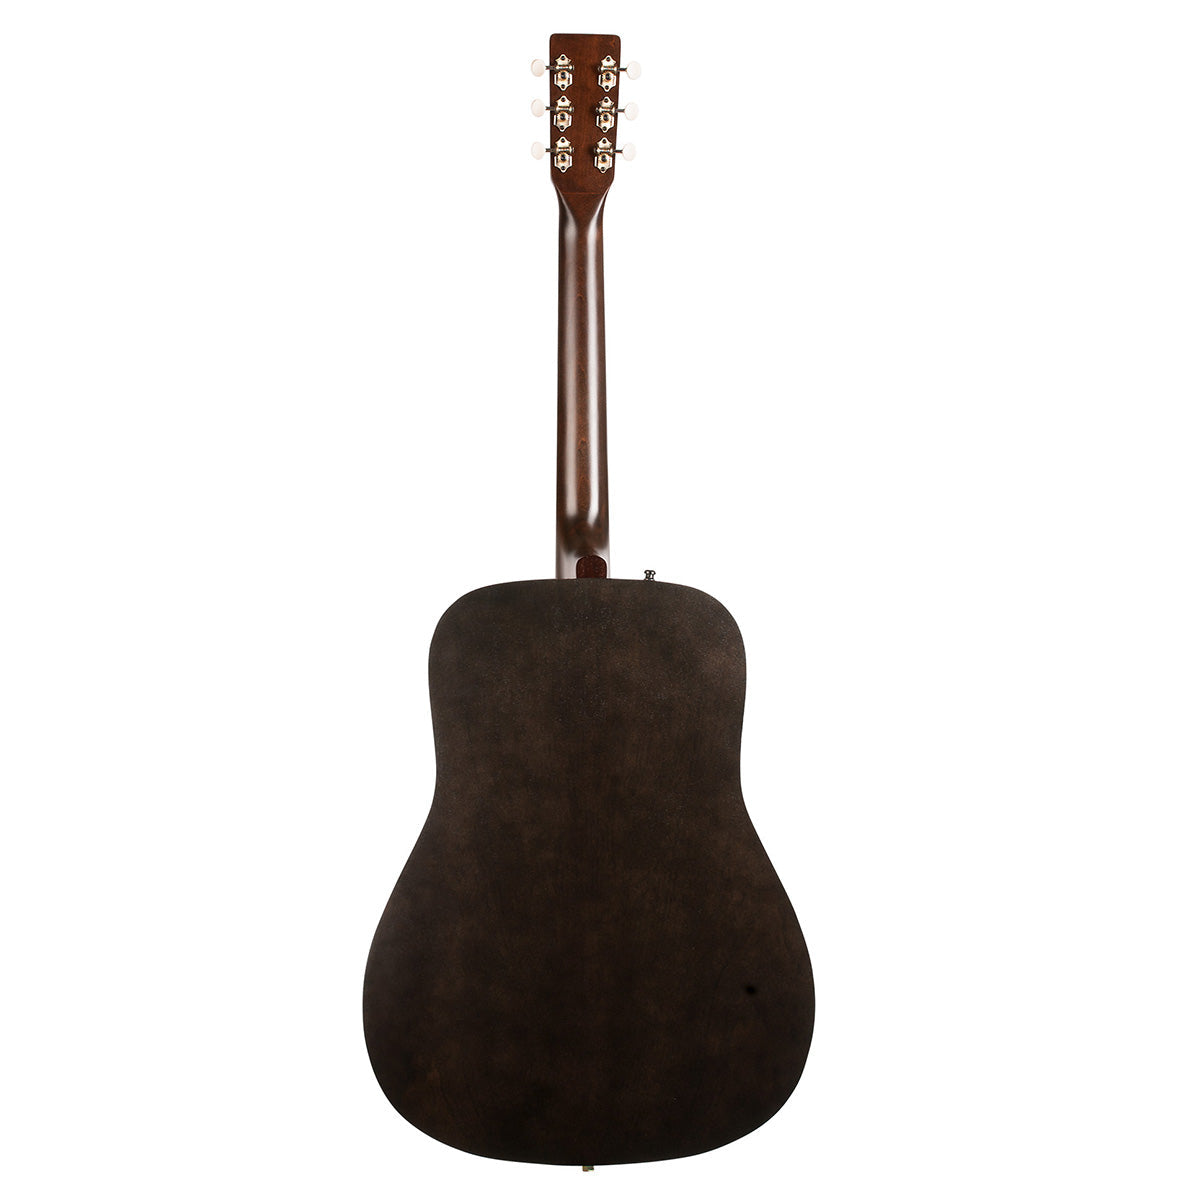 Art & Lutherie Americana Acoustic Guitar ~ Faded Black, Acoustic Guitar for sale at Richards Guitars.